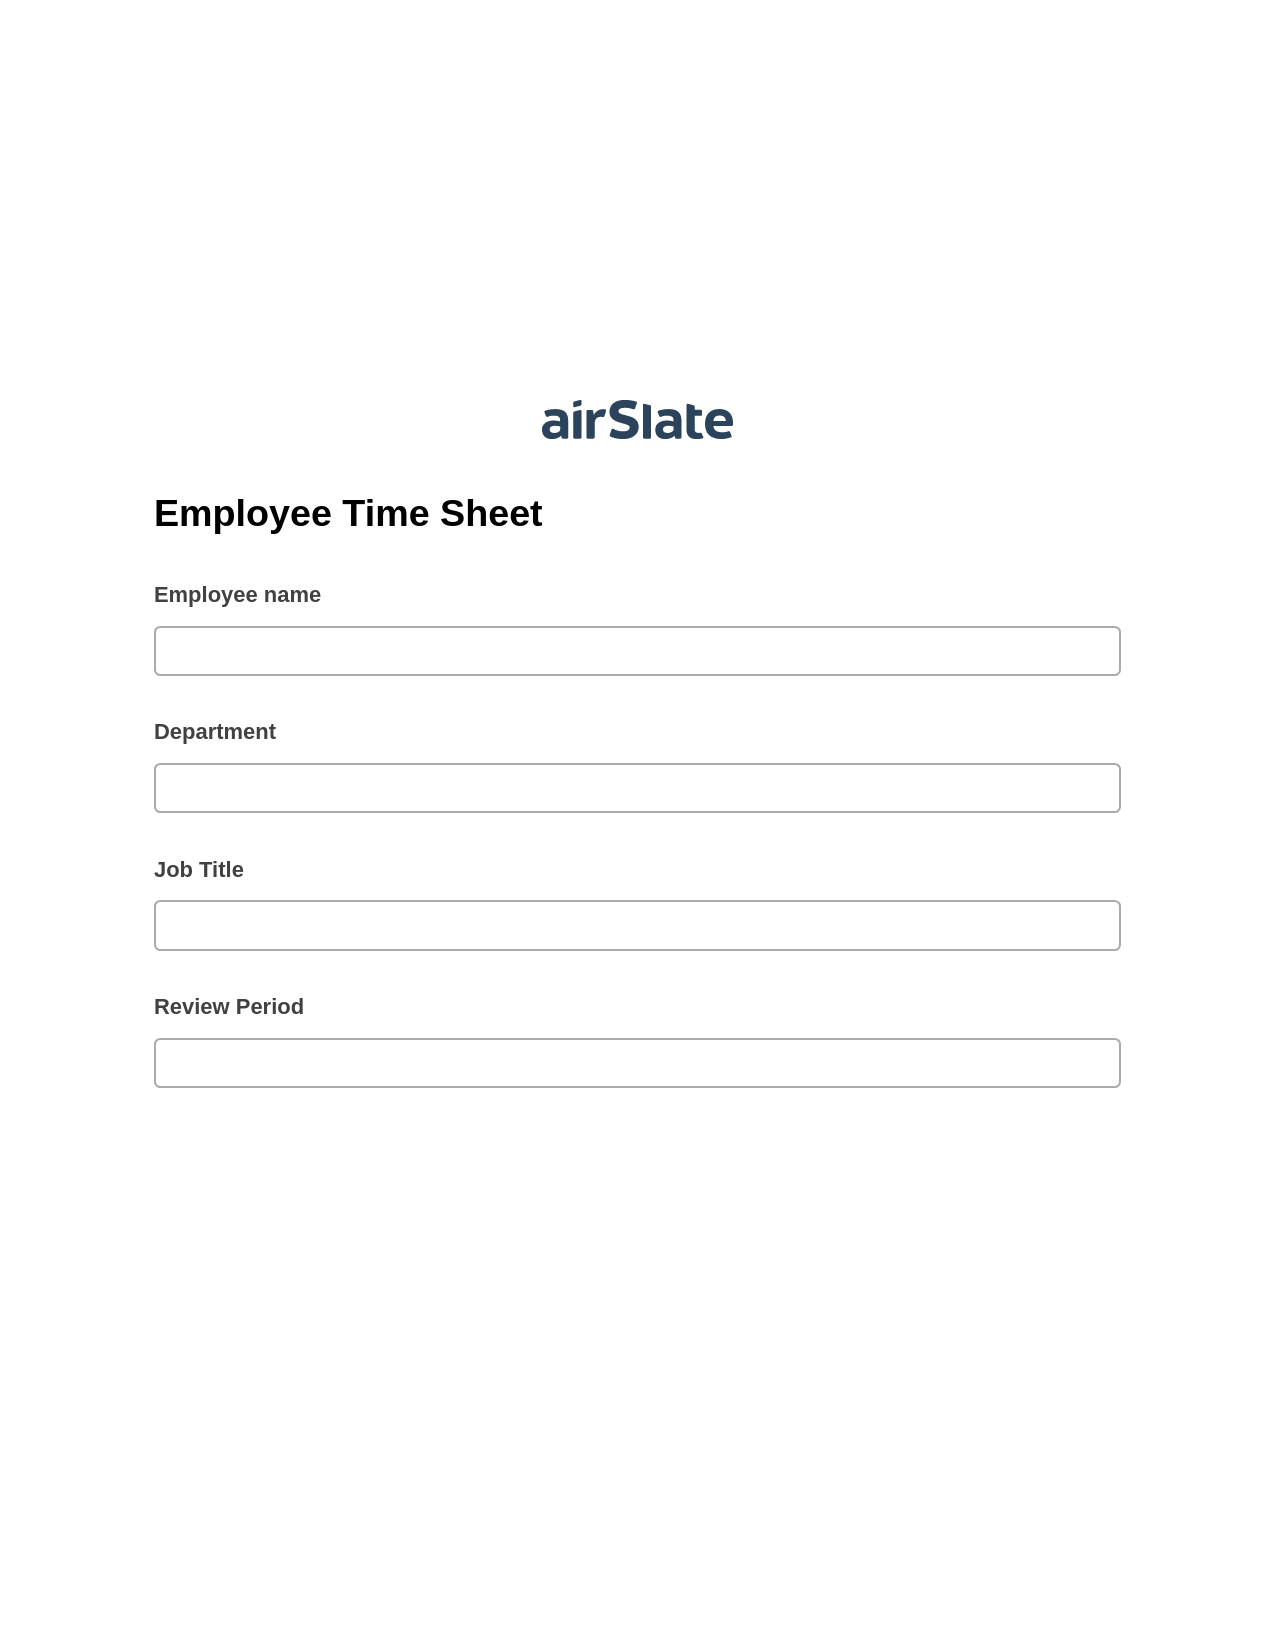 Employee Time Sheet Pre-fill from Google Sheets Bot, Update Audit Trail Bot, Archive to OneDrive Bot